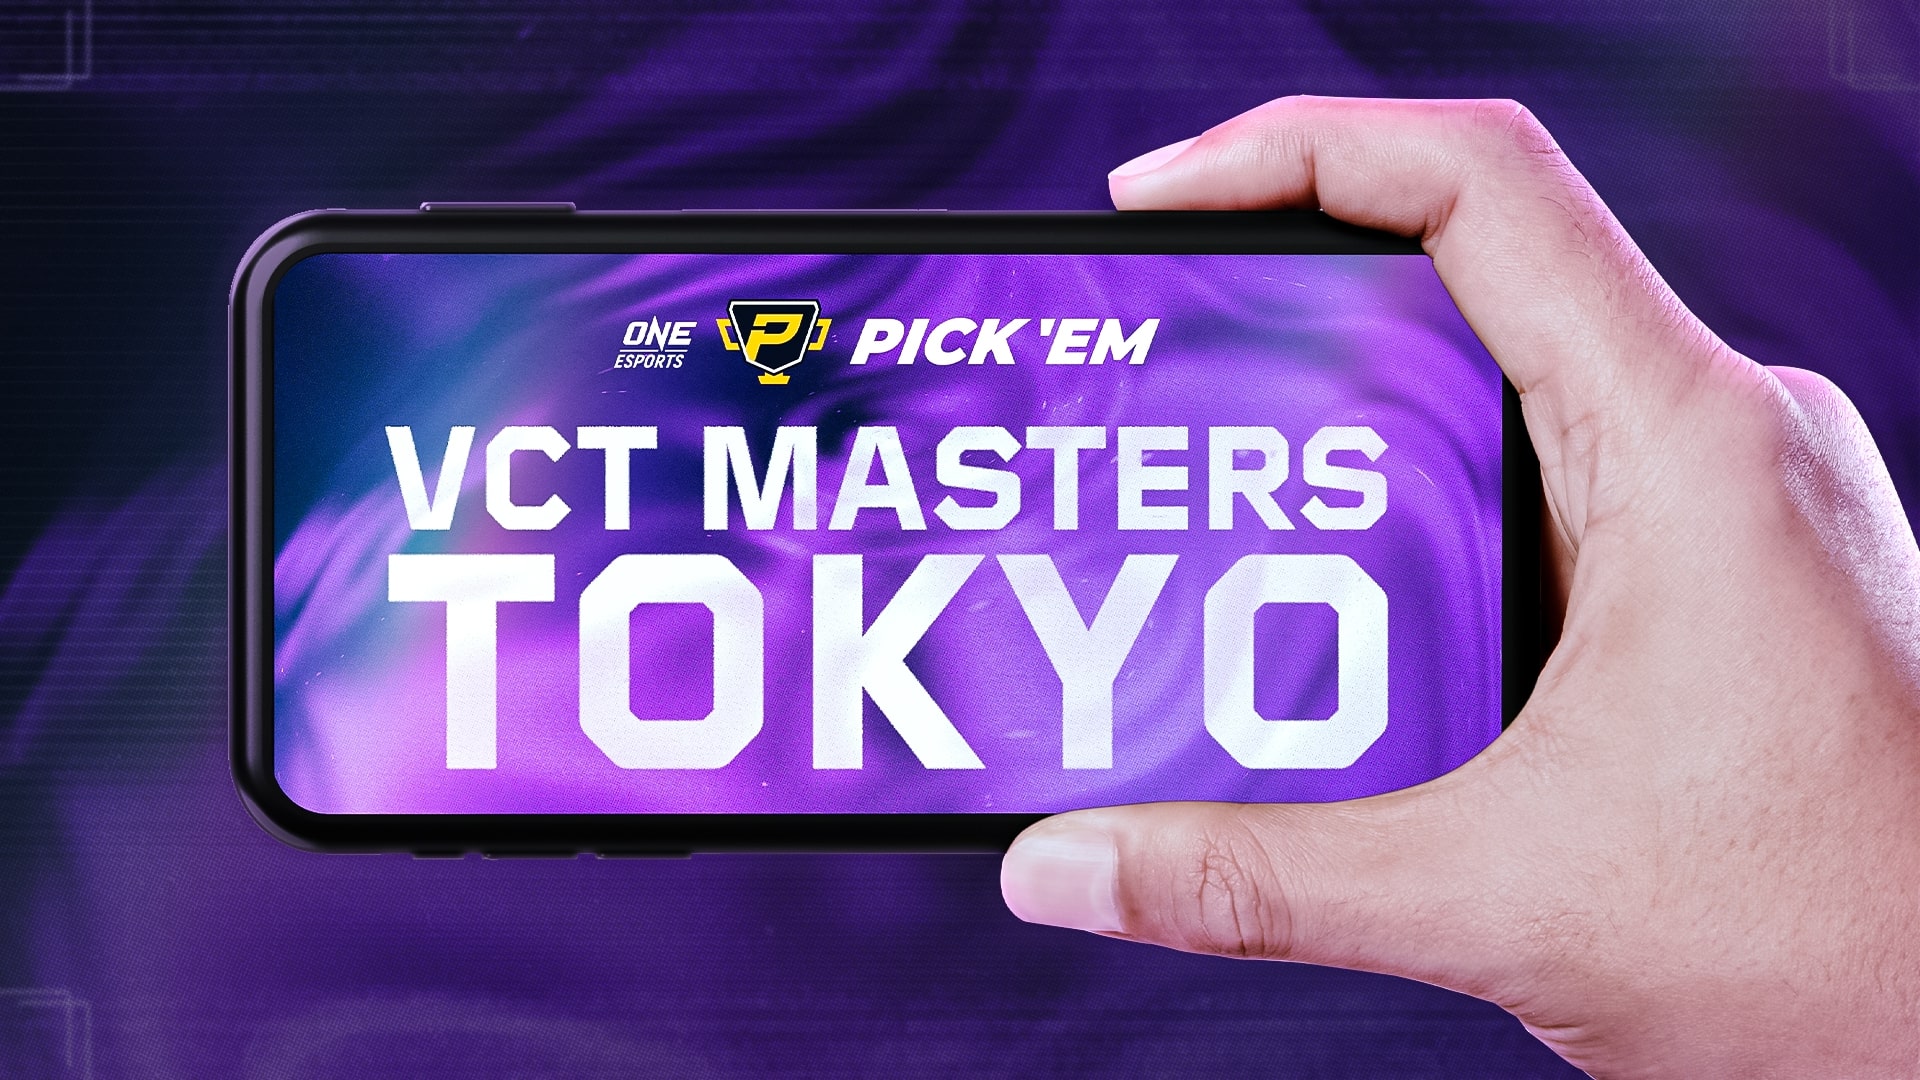 Win up to 7,000 Valorant Points in the ONE Esports VCT Masters Tokyo Pick ‘Em Challenge - ONE Esports